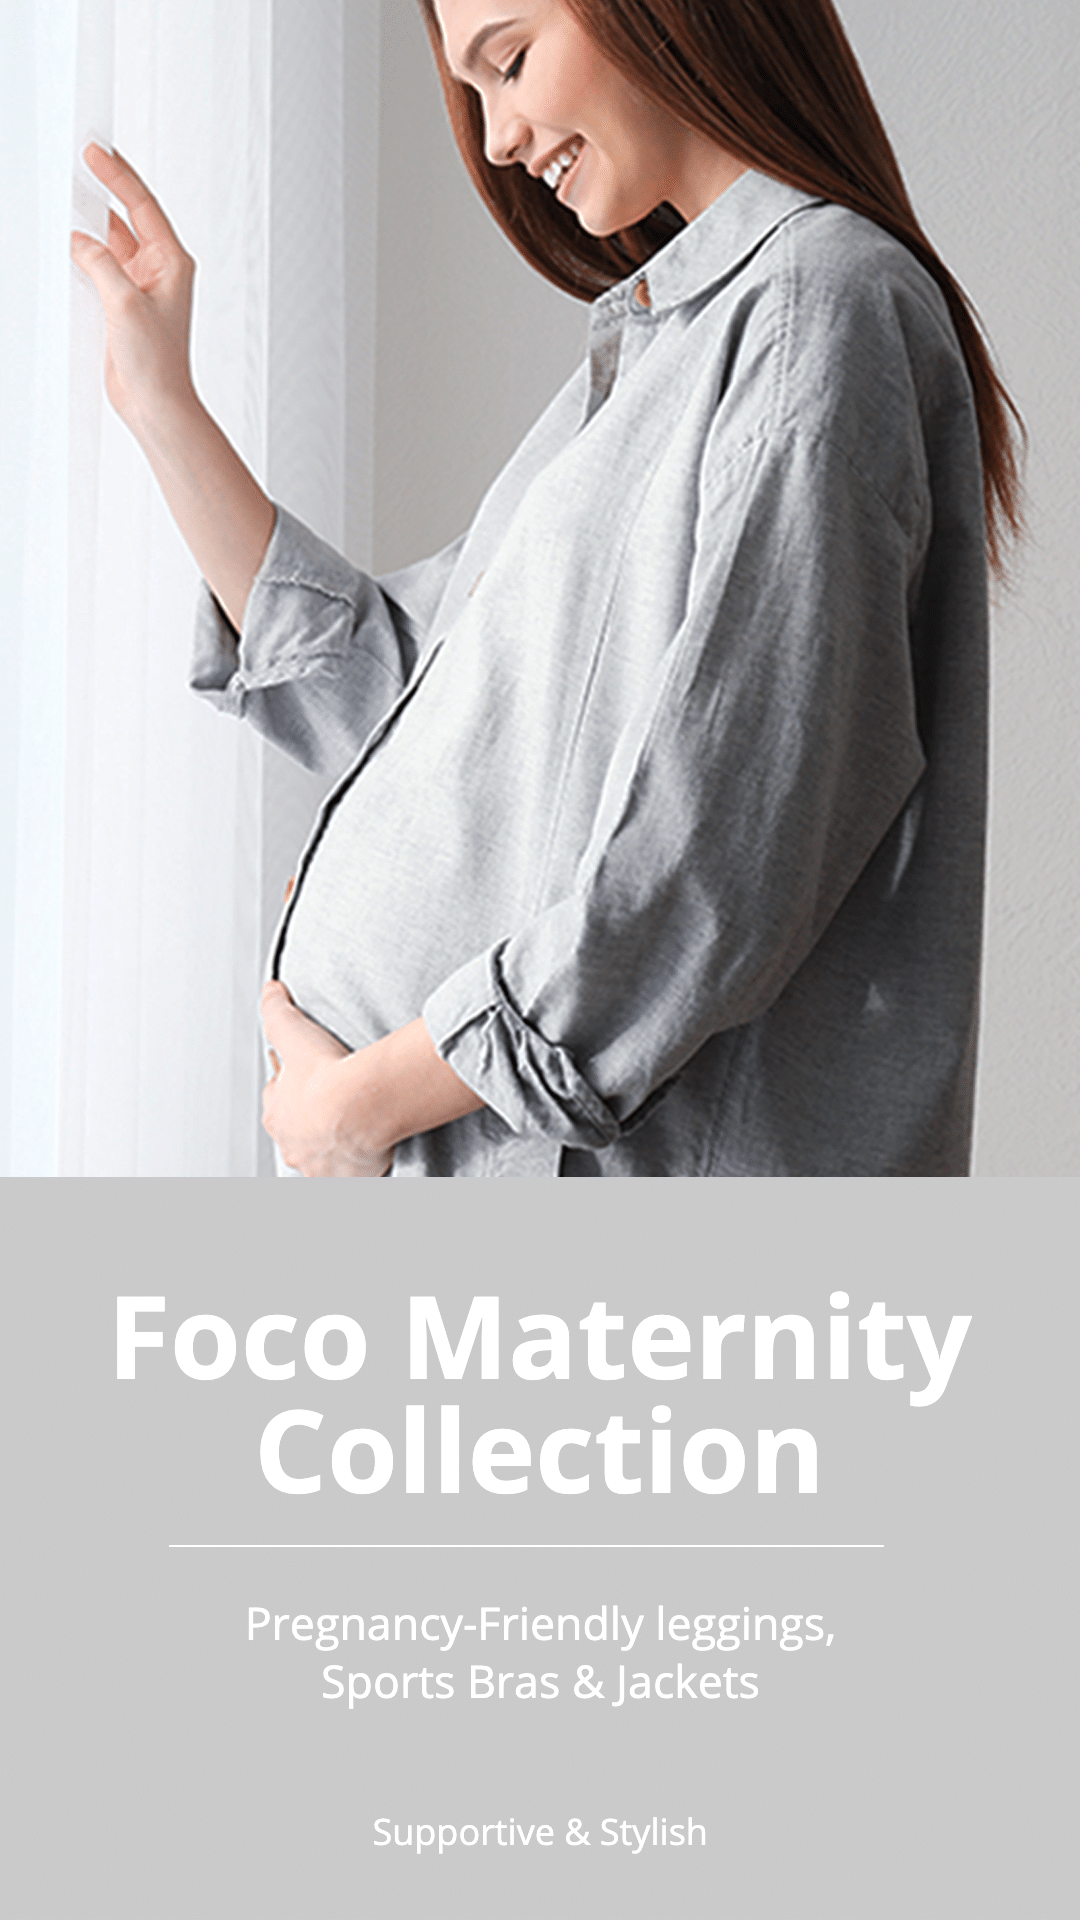 Simple Maternity Collection Promotion Ecommerce Story预览效果